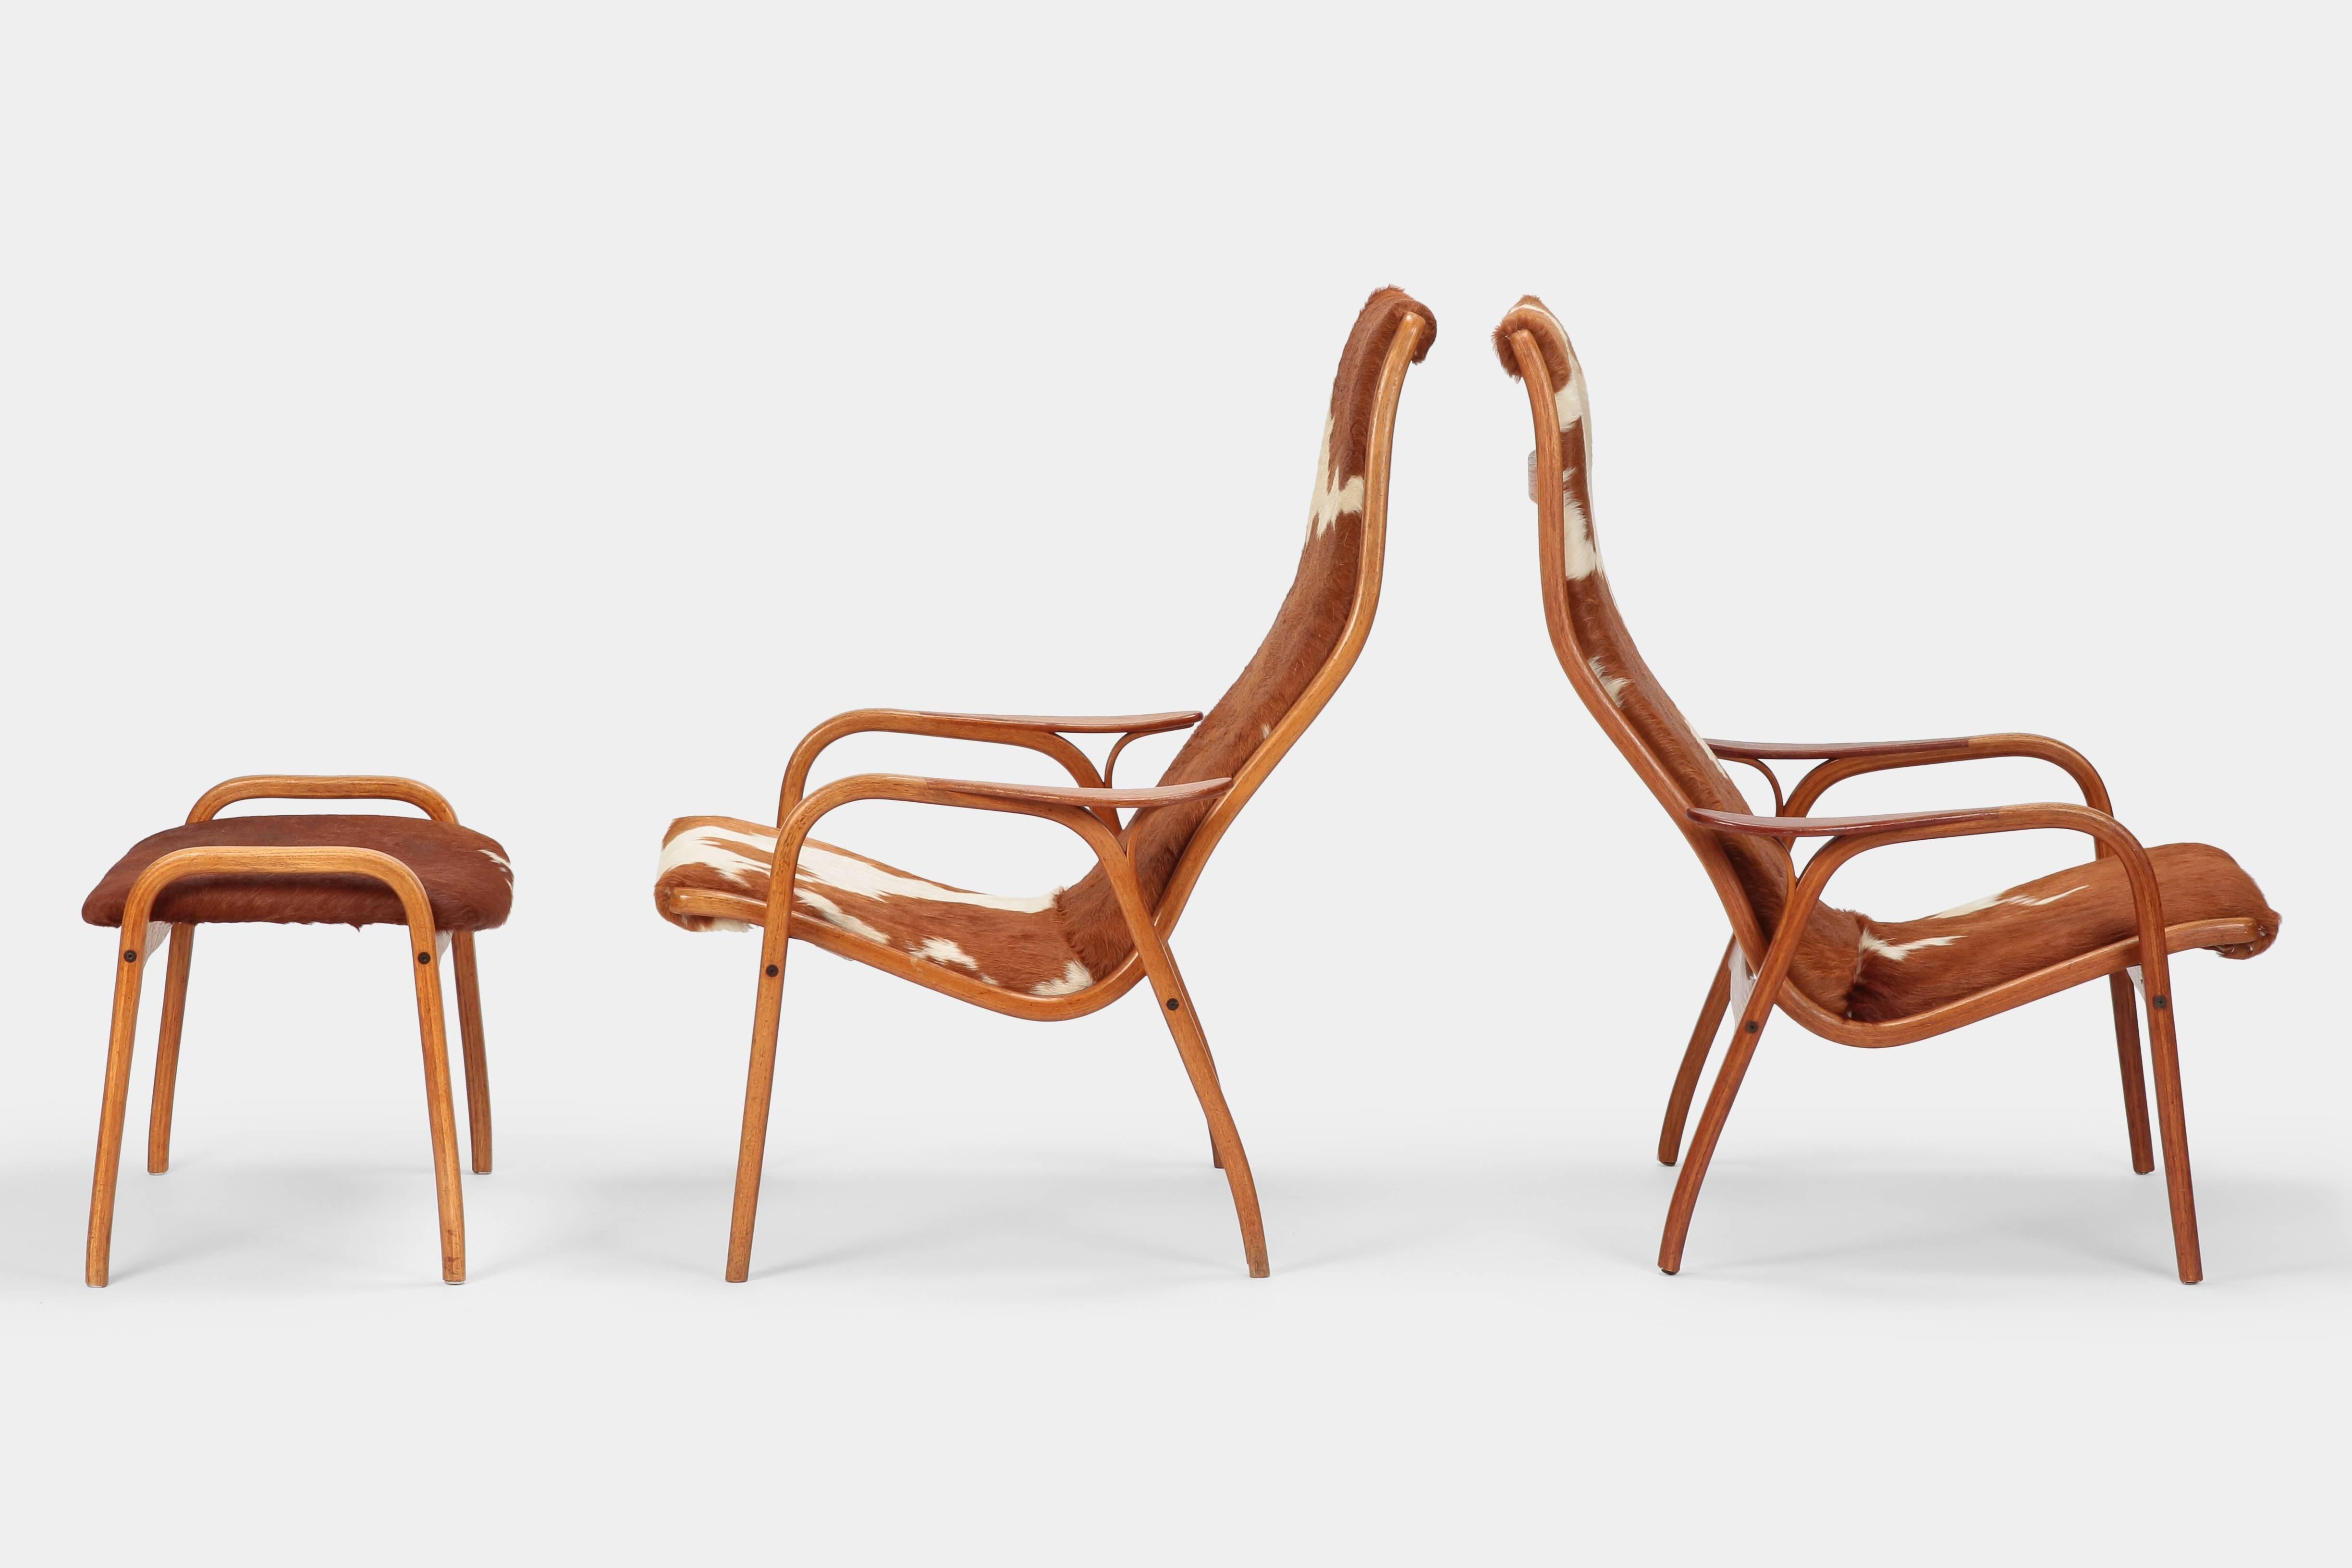 Yngve Ekström “Lamino” lounge chairs and ottoman manufactured by Swedese in the 1950s in Sweden. A beautiful example of Scandinavian Mid-Century Modern. Stunning bent solid oakwood frame and a brown-white cowhide upholstery. The legs from one of the